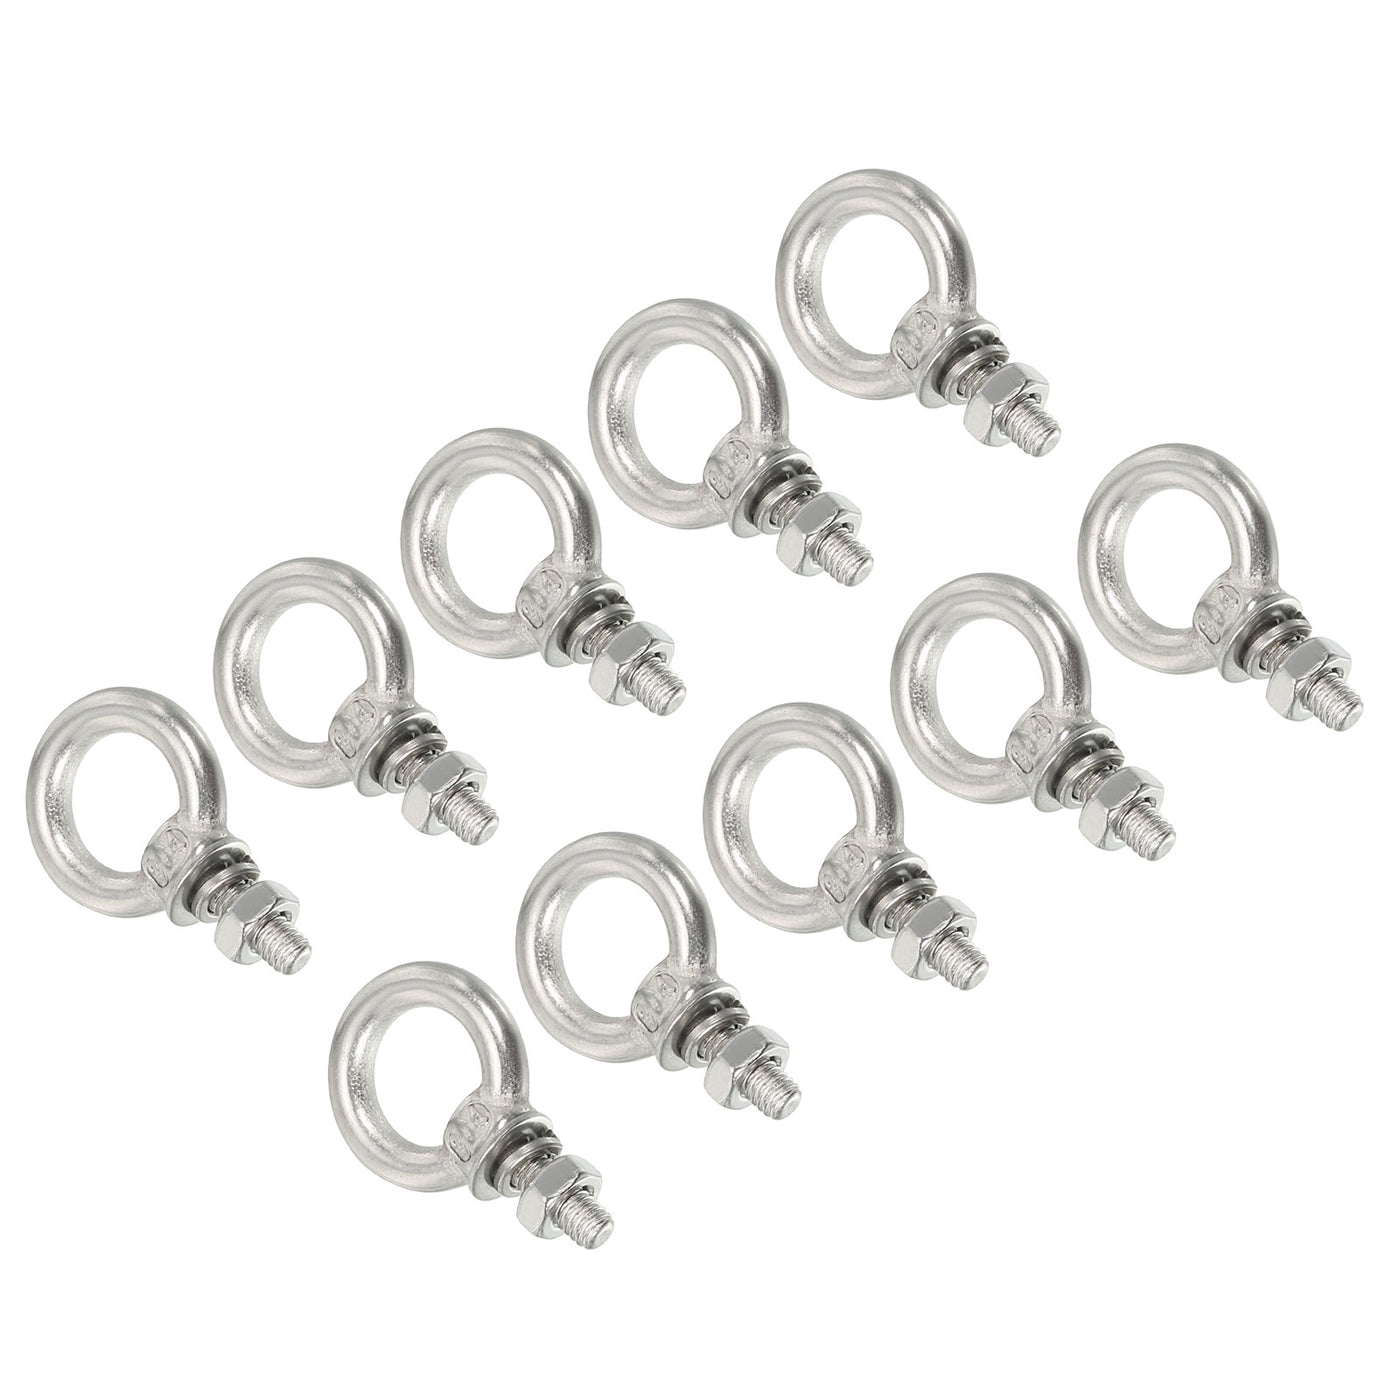 uxcell Uxcell M4x11 3/16"x7/16" Stainless Steel Eye Bolts Threaded Screw Eyebolt Shoulder Ring with Nuts Washers for Lifting Hanging, 10 Set